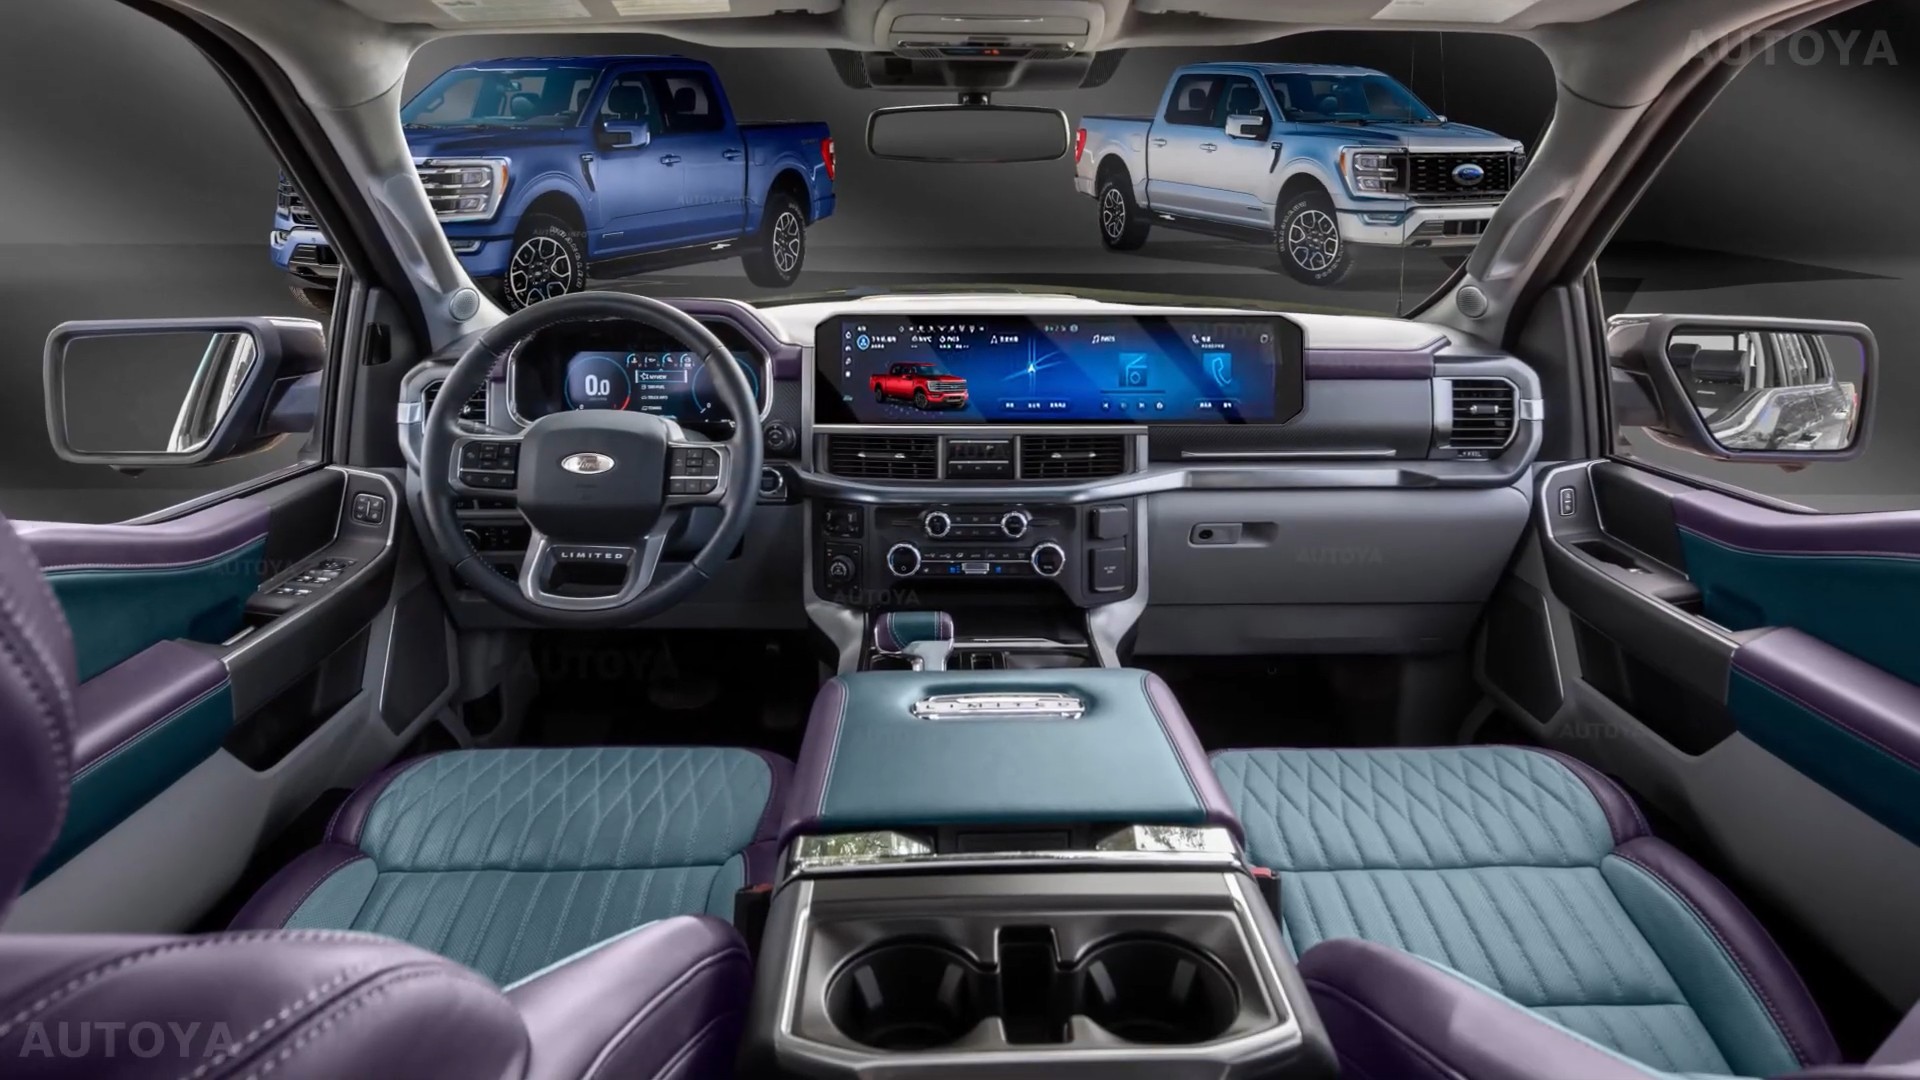 2024 Ford F 150 Truck Refresh Gets Imagined With All Possible Interior Changes 26 